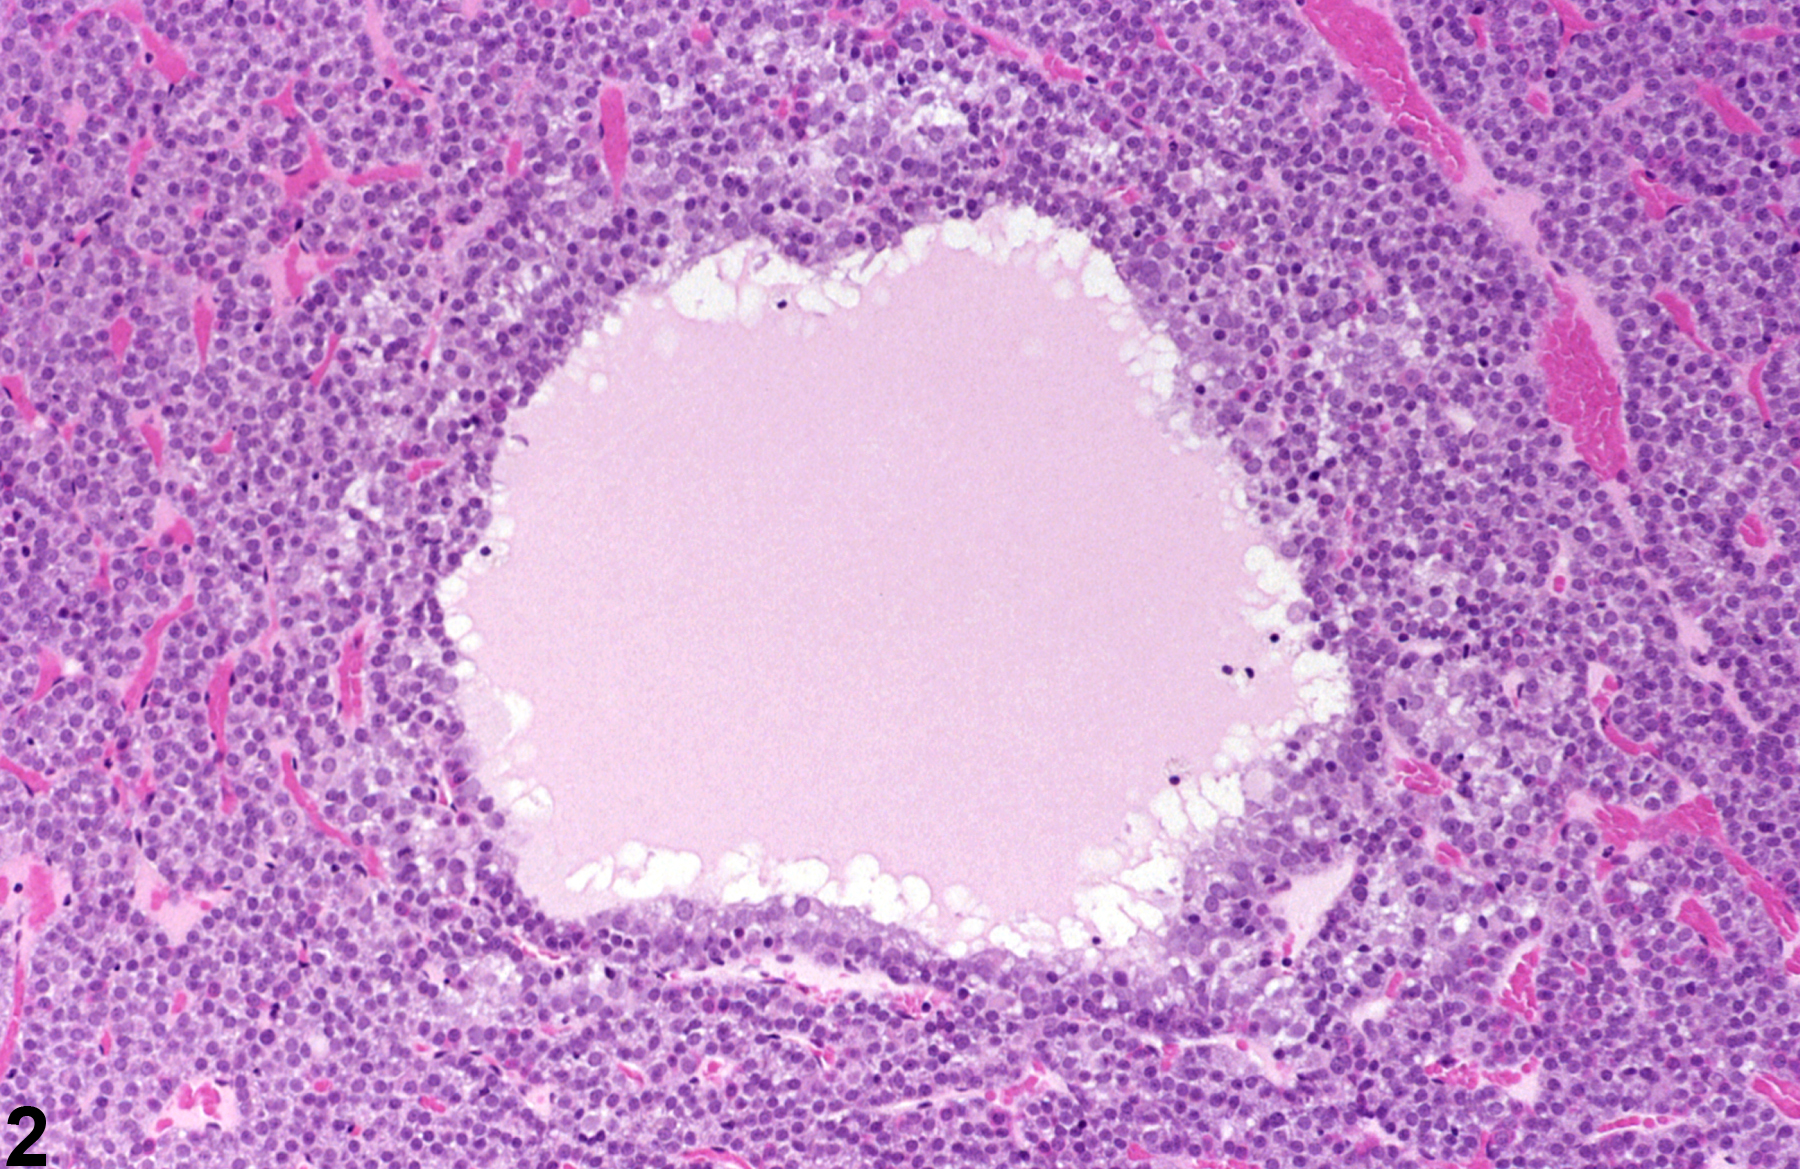 Image of cyst in the pituitary gland from a female Harlan Sprague-Dawley rat in a chronic study